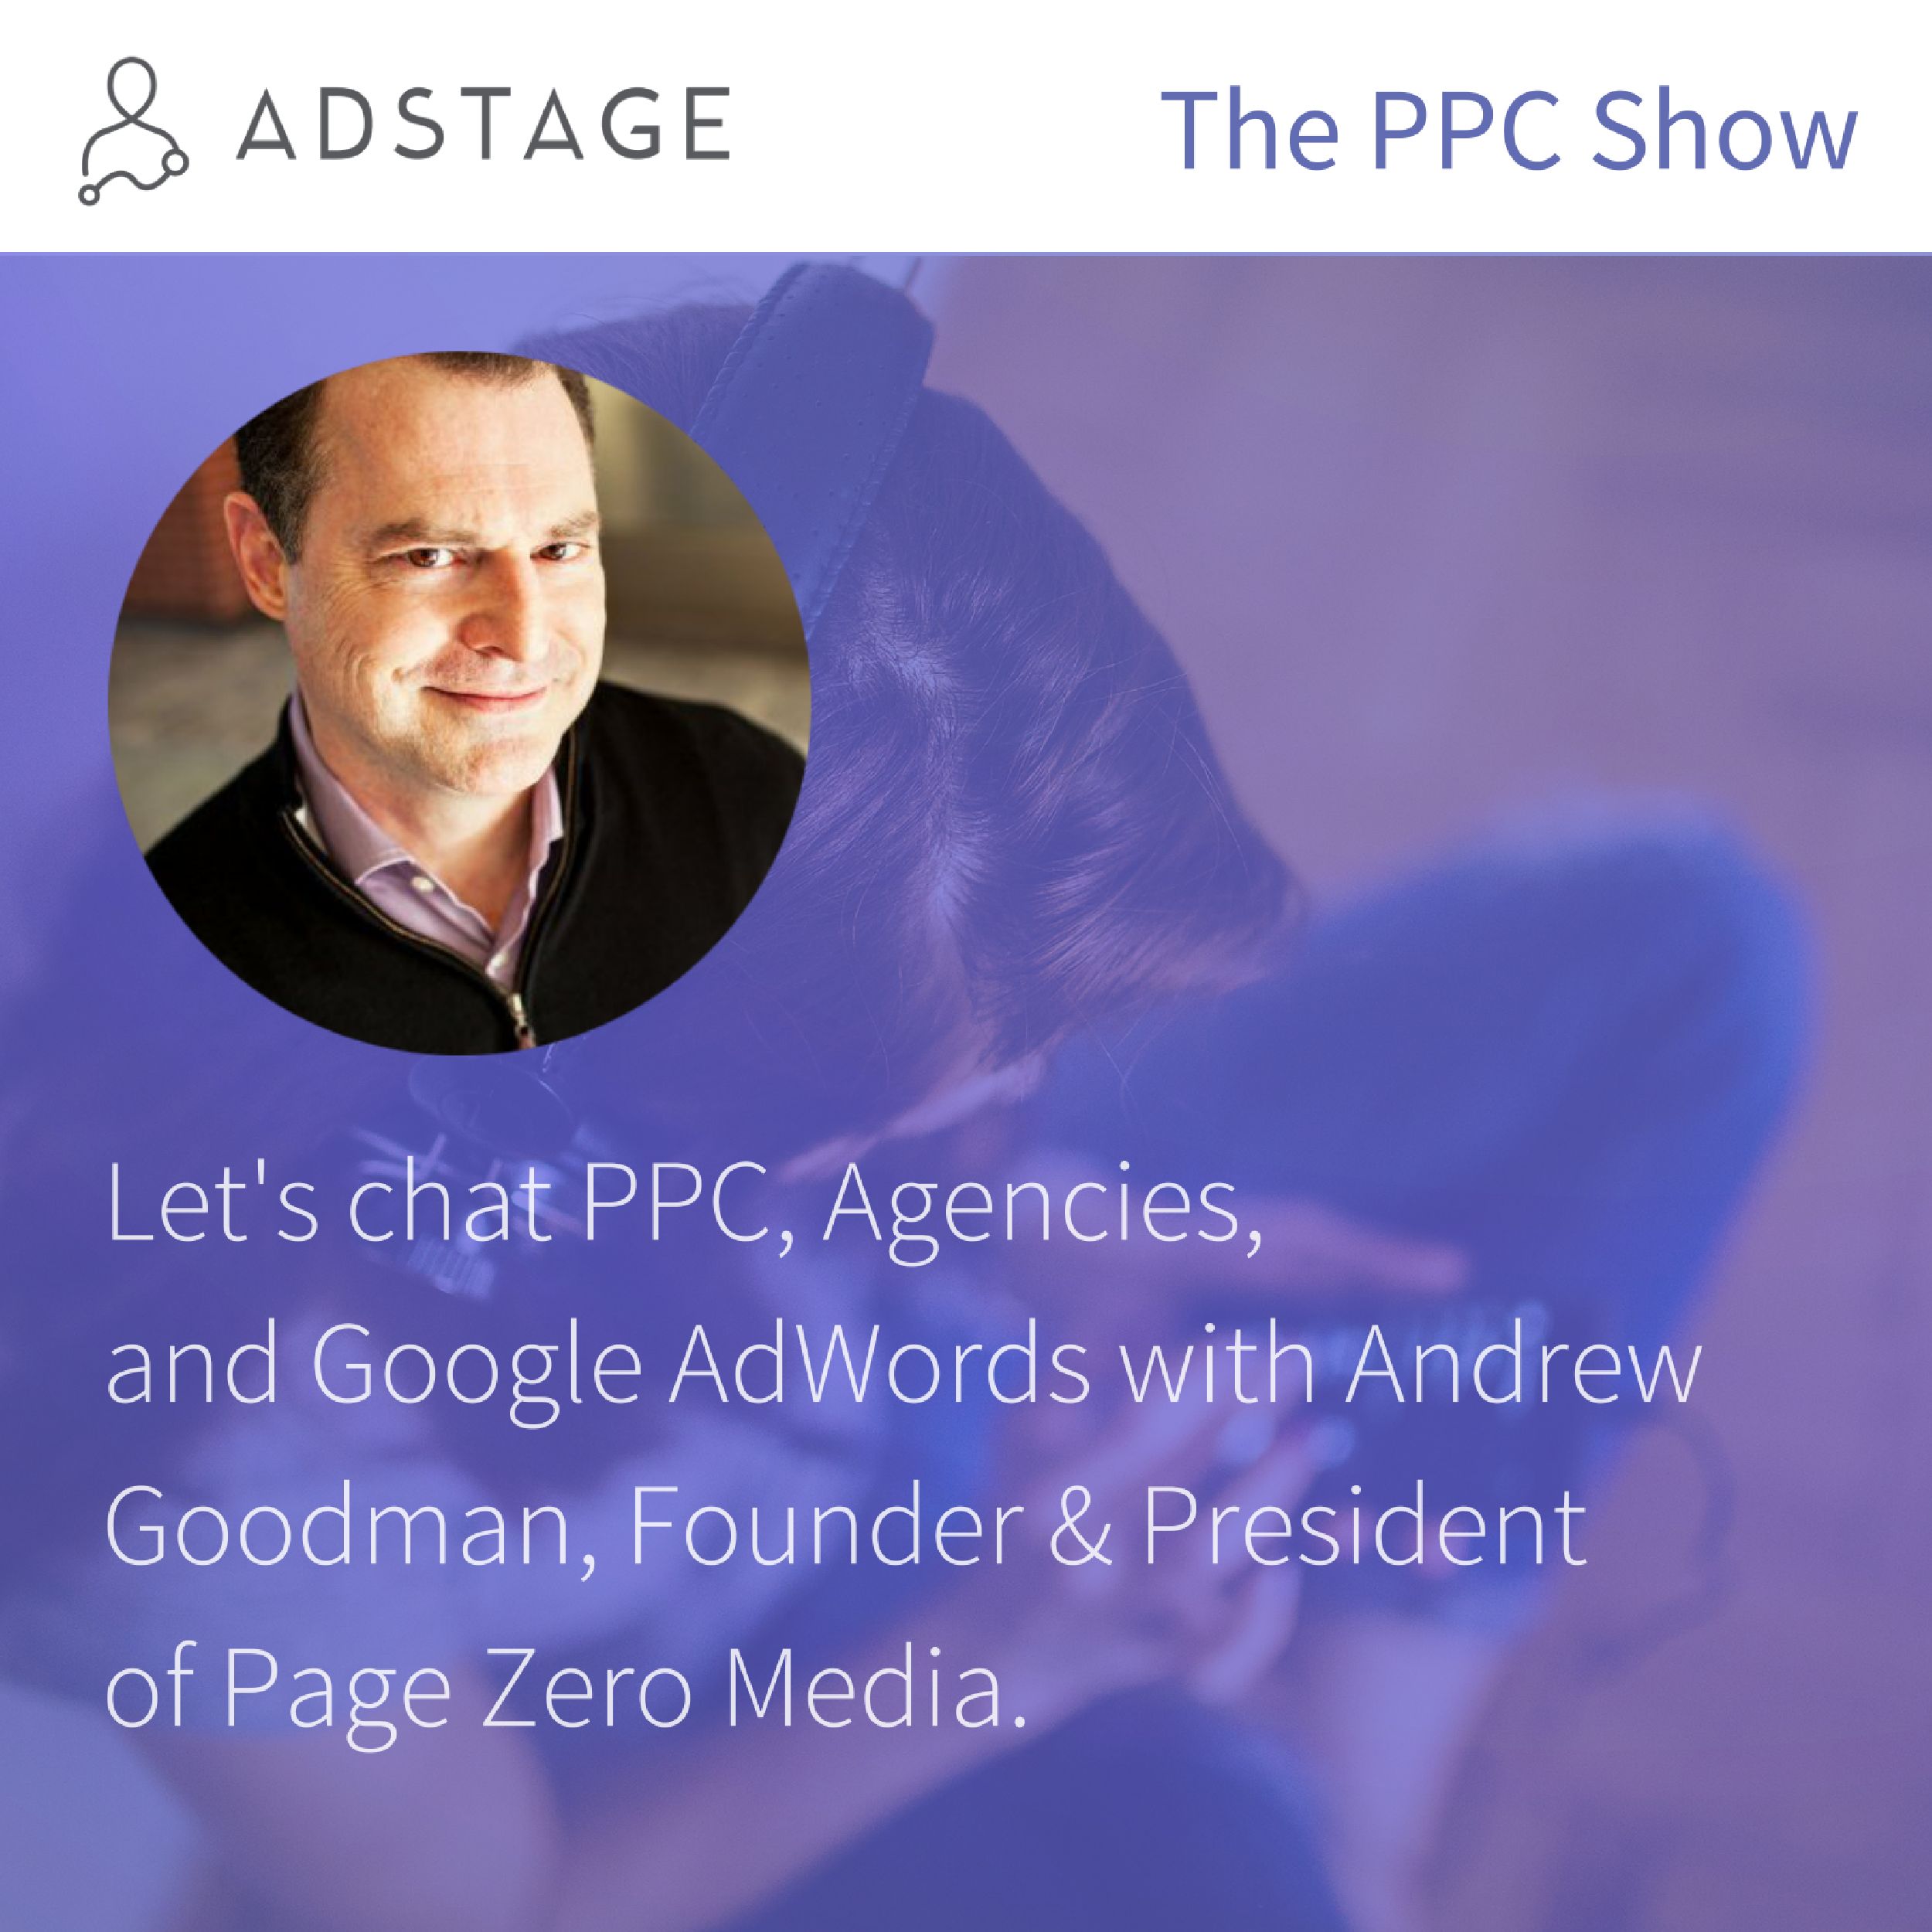 Episode #033 - This Week We Chat with Andrew Goodman, Founder of Page Zero